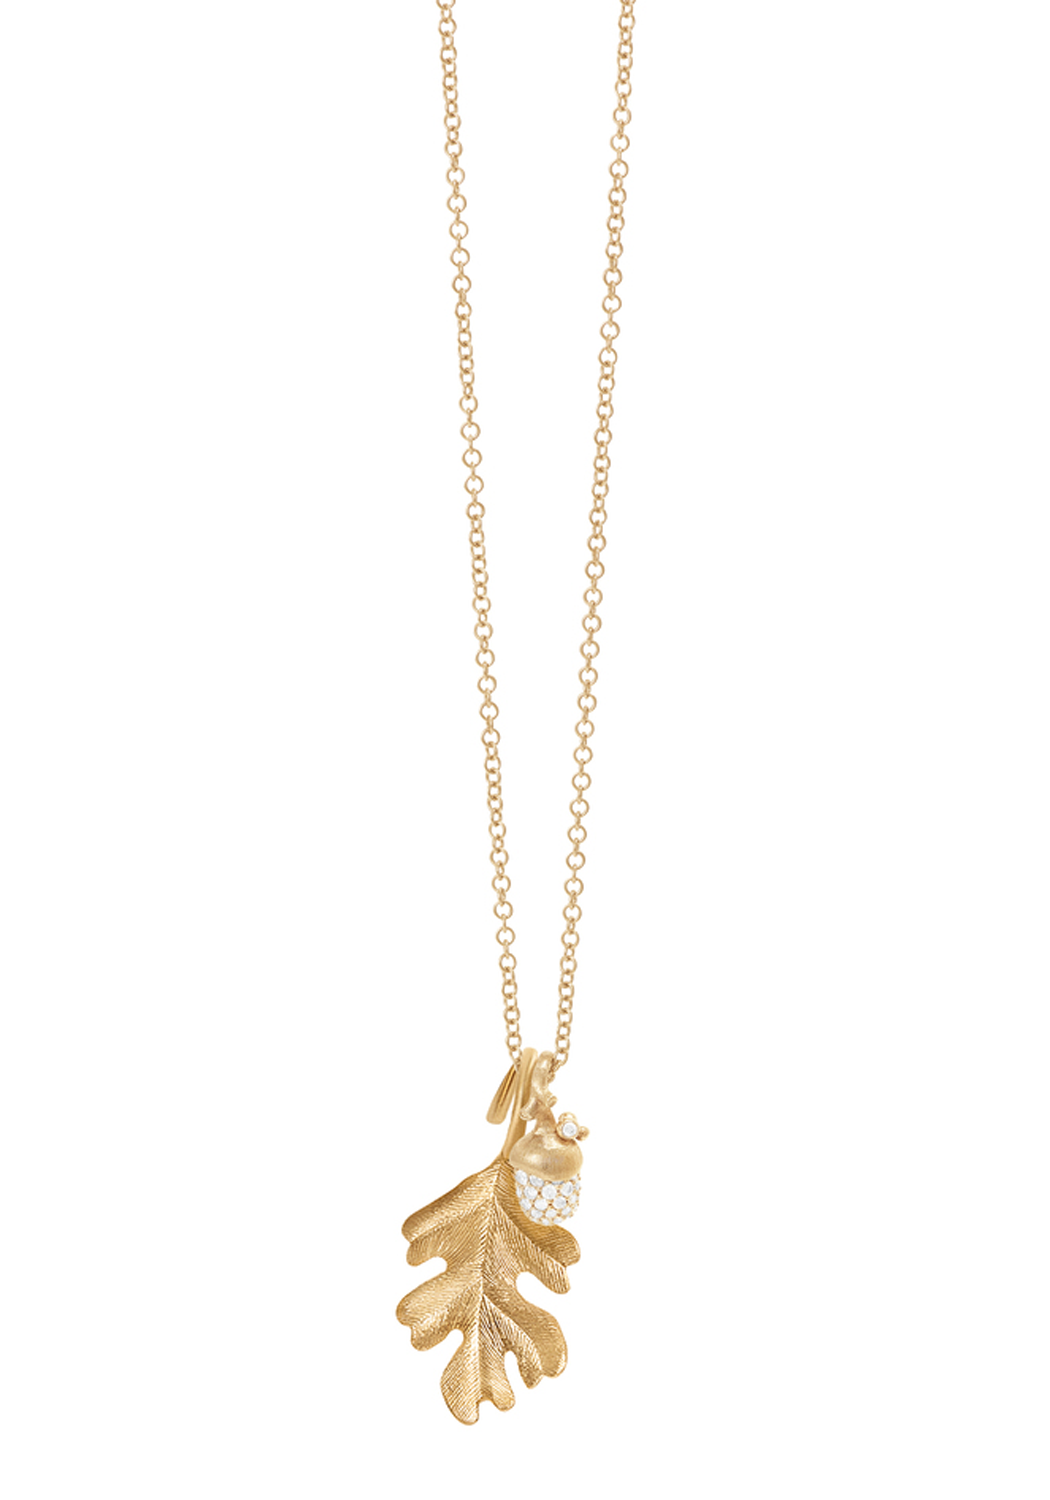 OLE LYNGGAARD Leaf & Acorn Pendants on a chain (Sold separately) | OsterJewelers.com